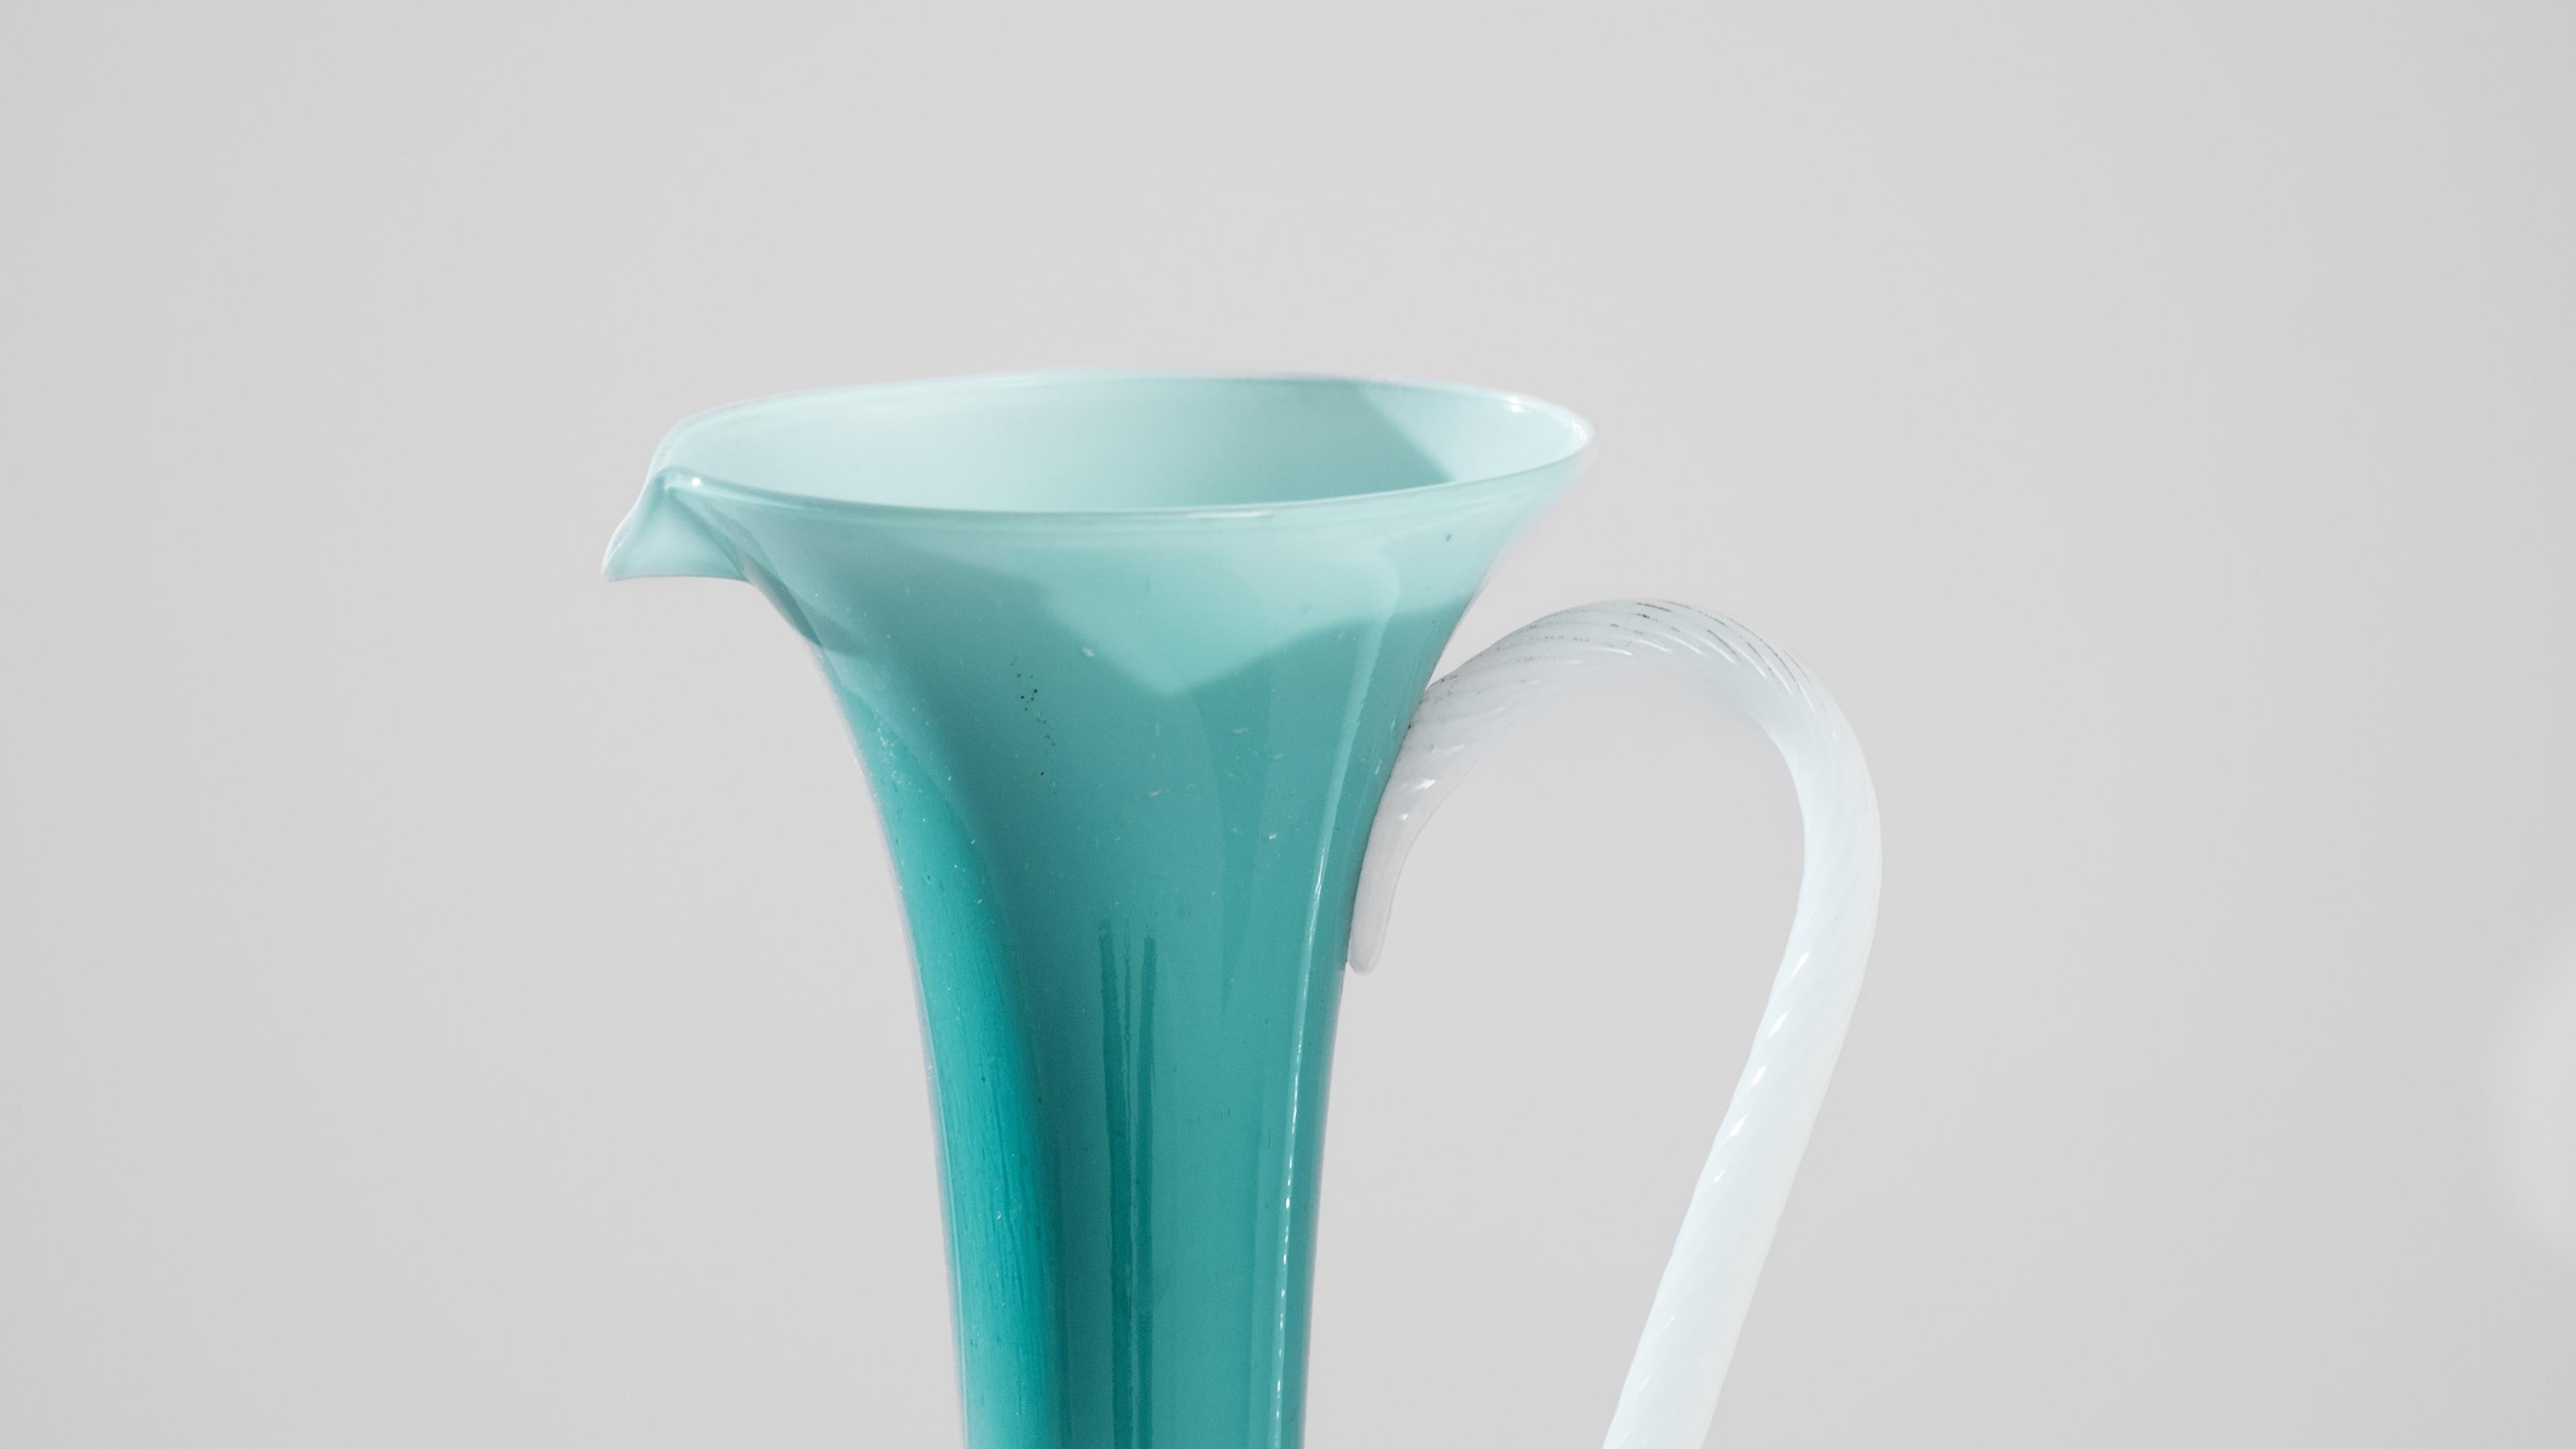 This 1960s Italian green glass jug is a stunning example of vintage elegance and timeless design. Crafted during a period where attention to detail and form was paramount, the jug exudes a delicate balance between beauty and function. Its slender